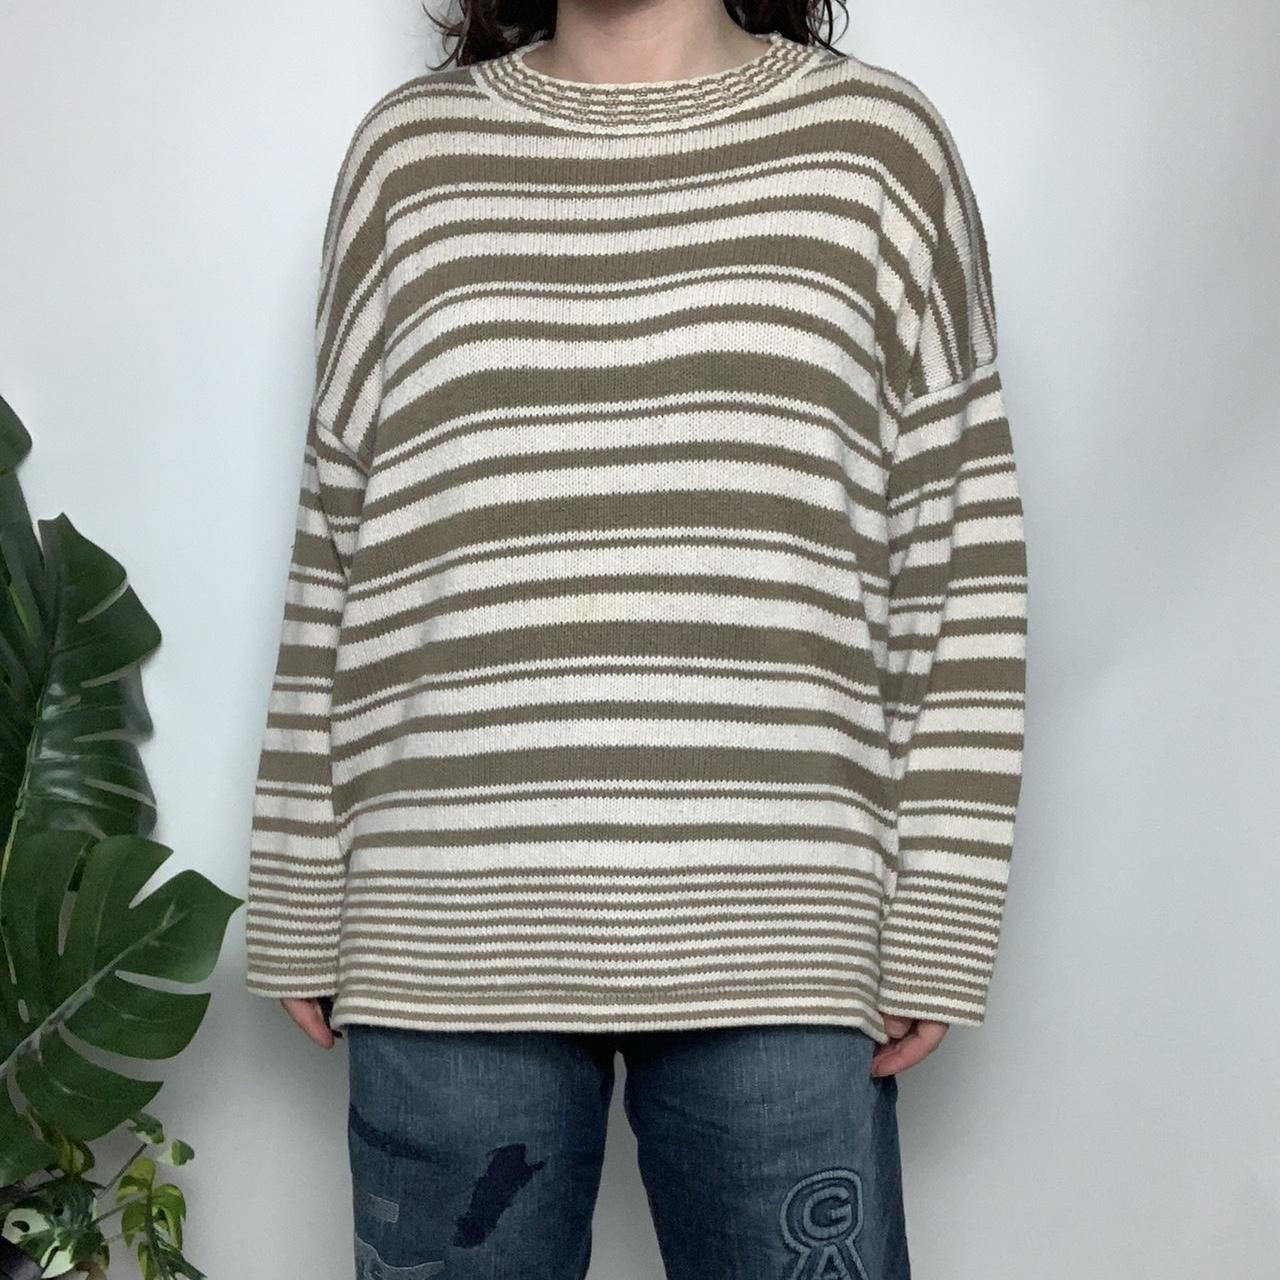 Vintage 90s white and brown striped slouchy knitted jumper